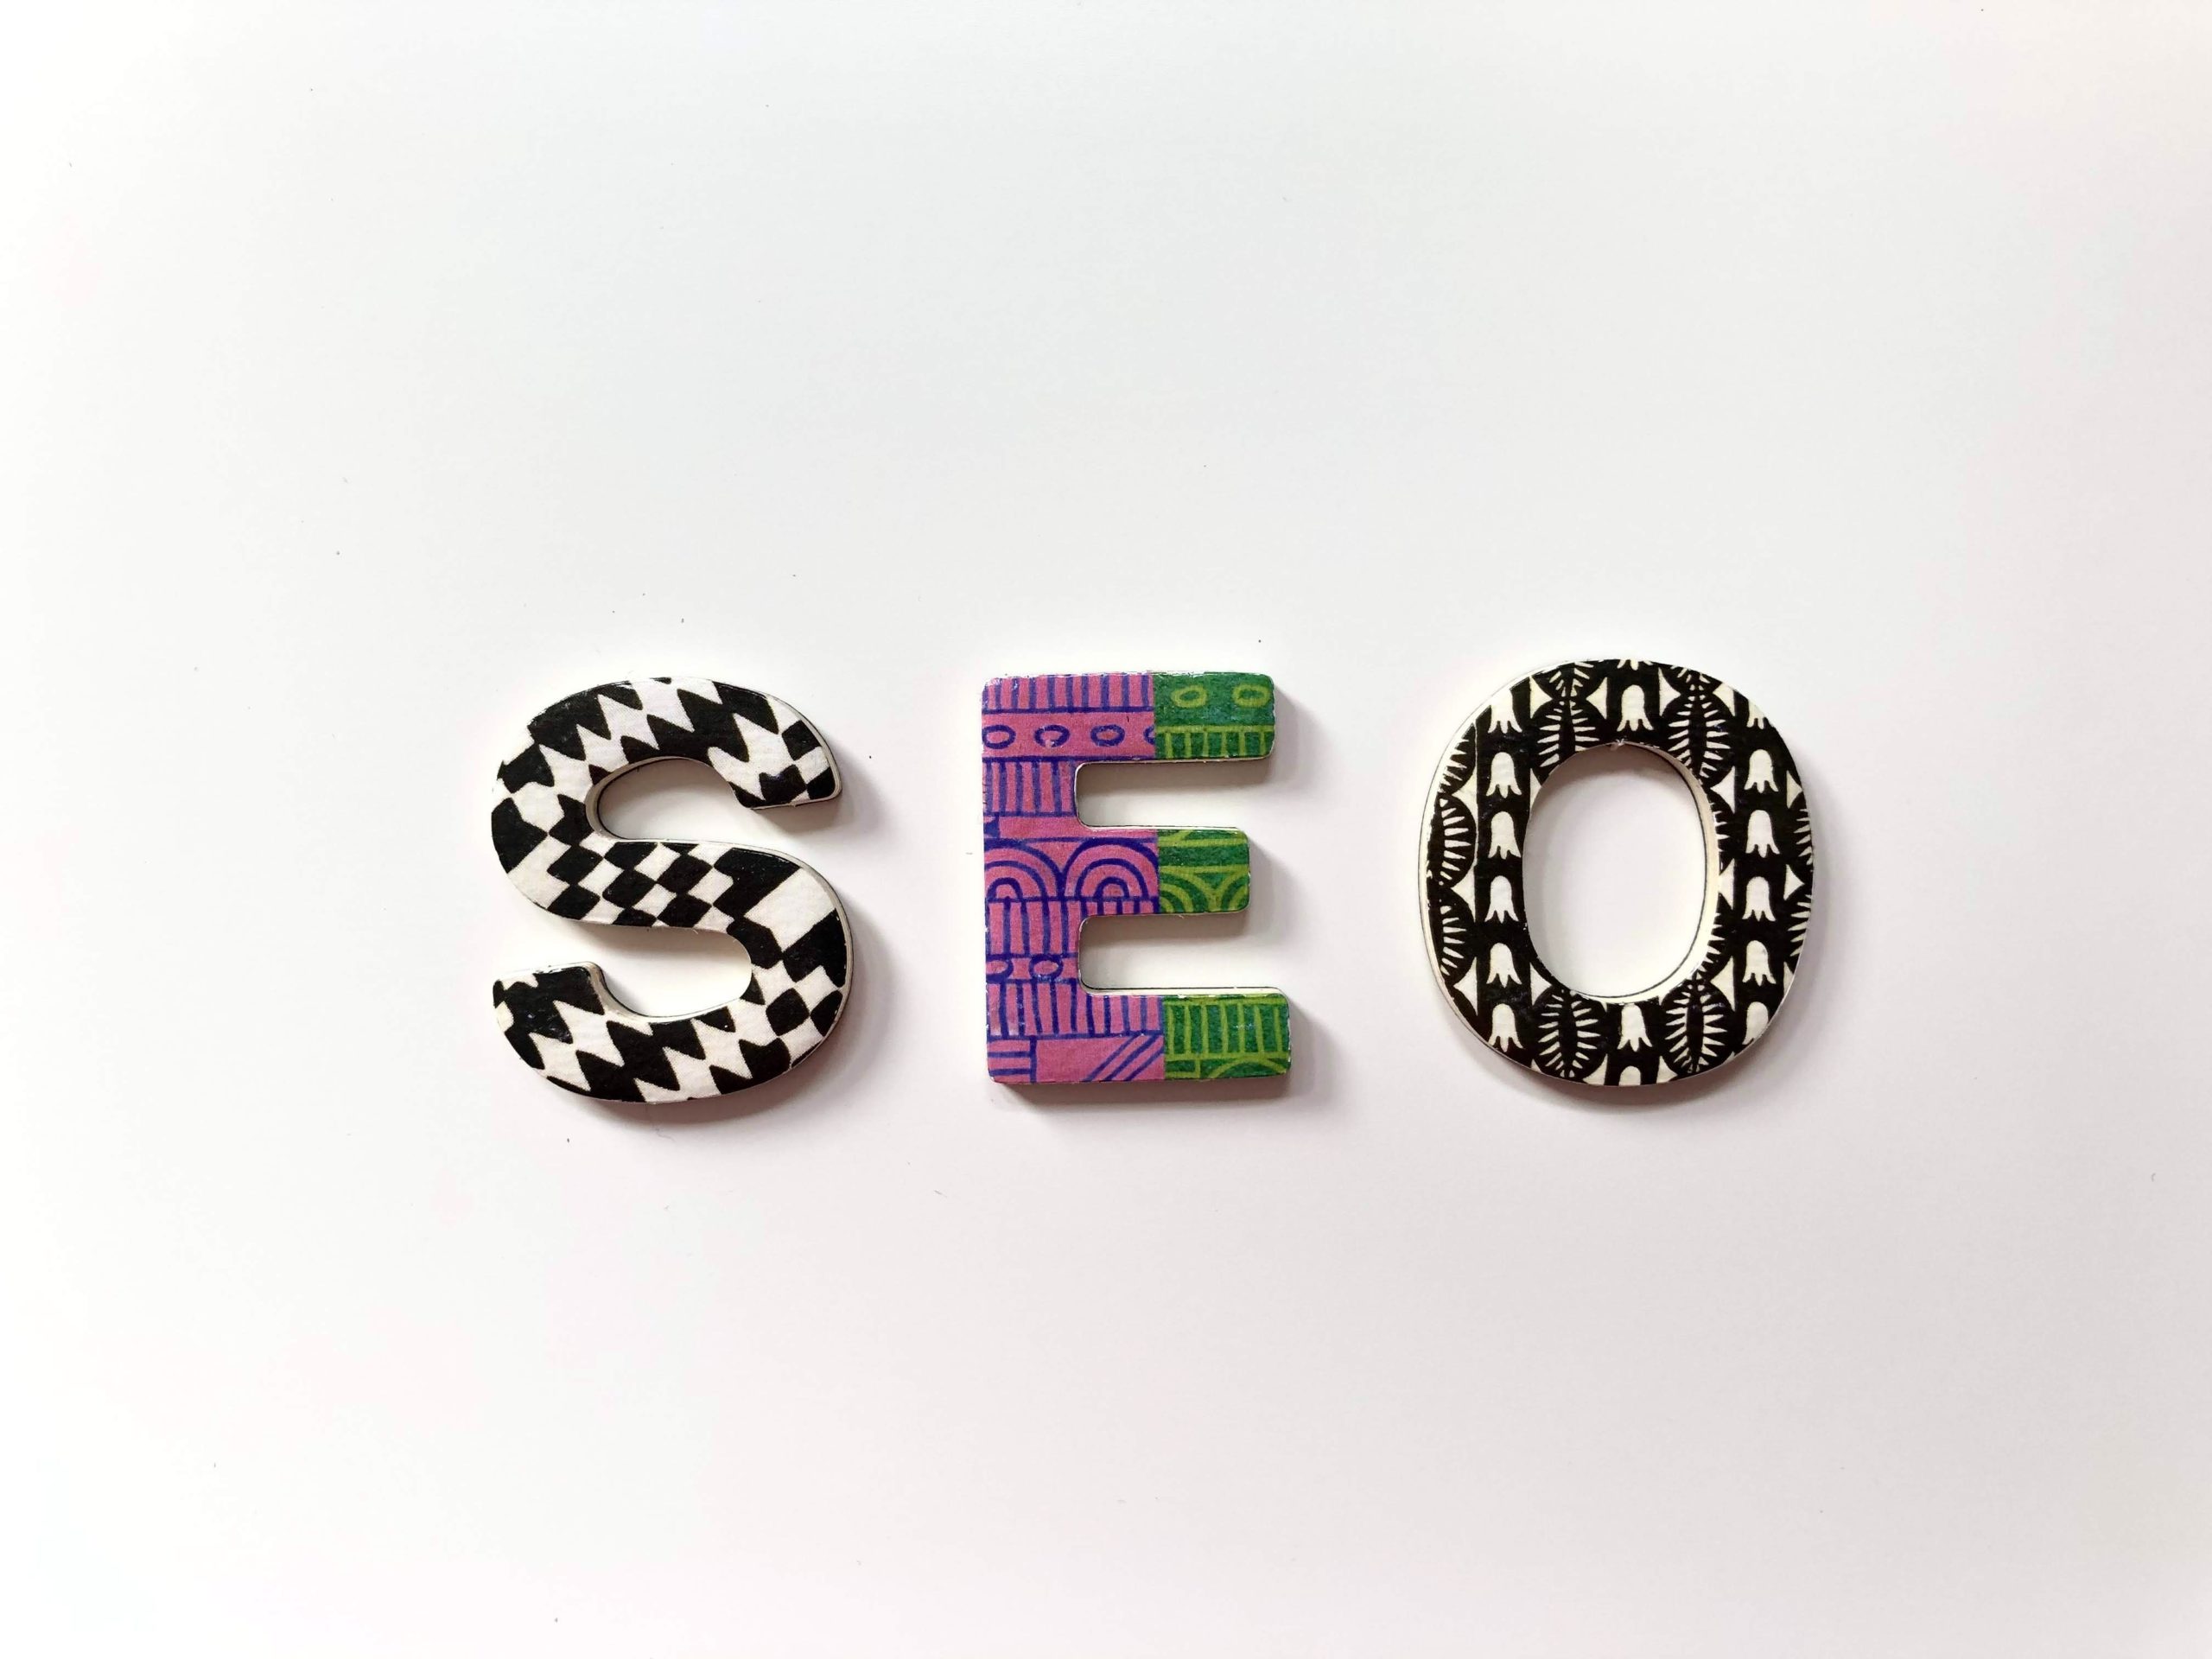 SEO letters in patterns